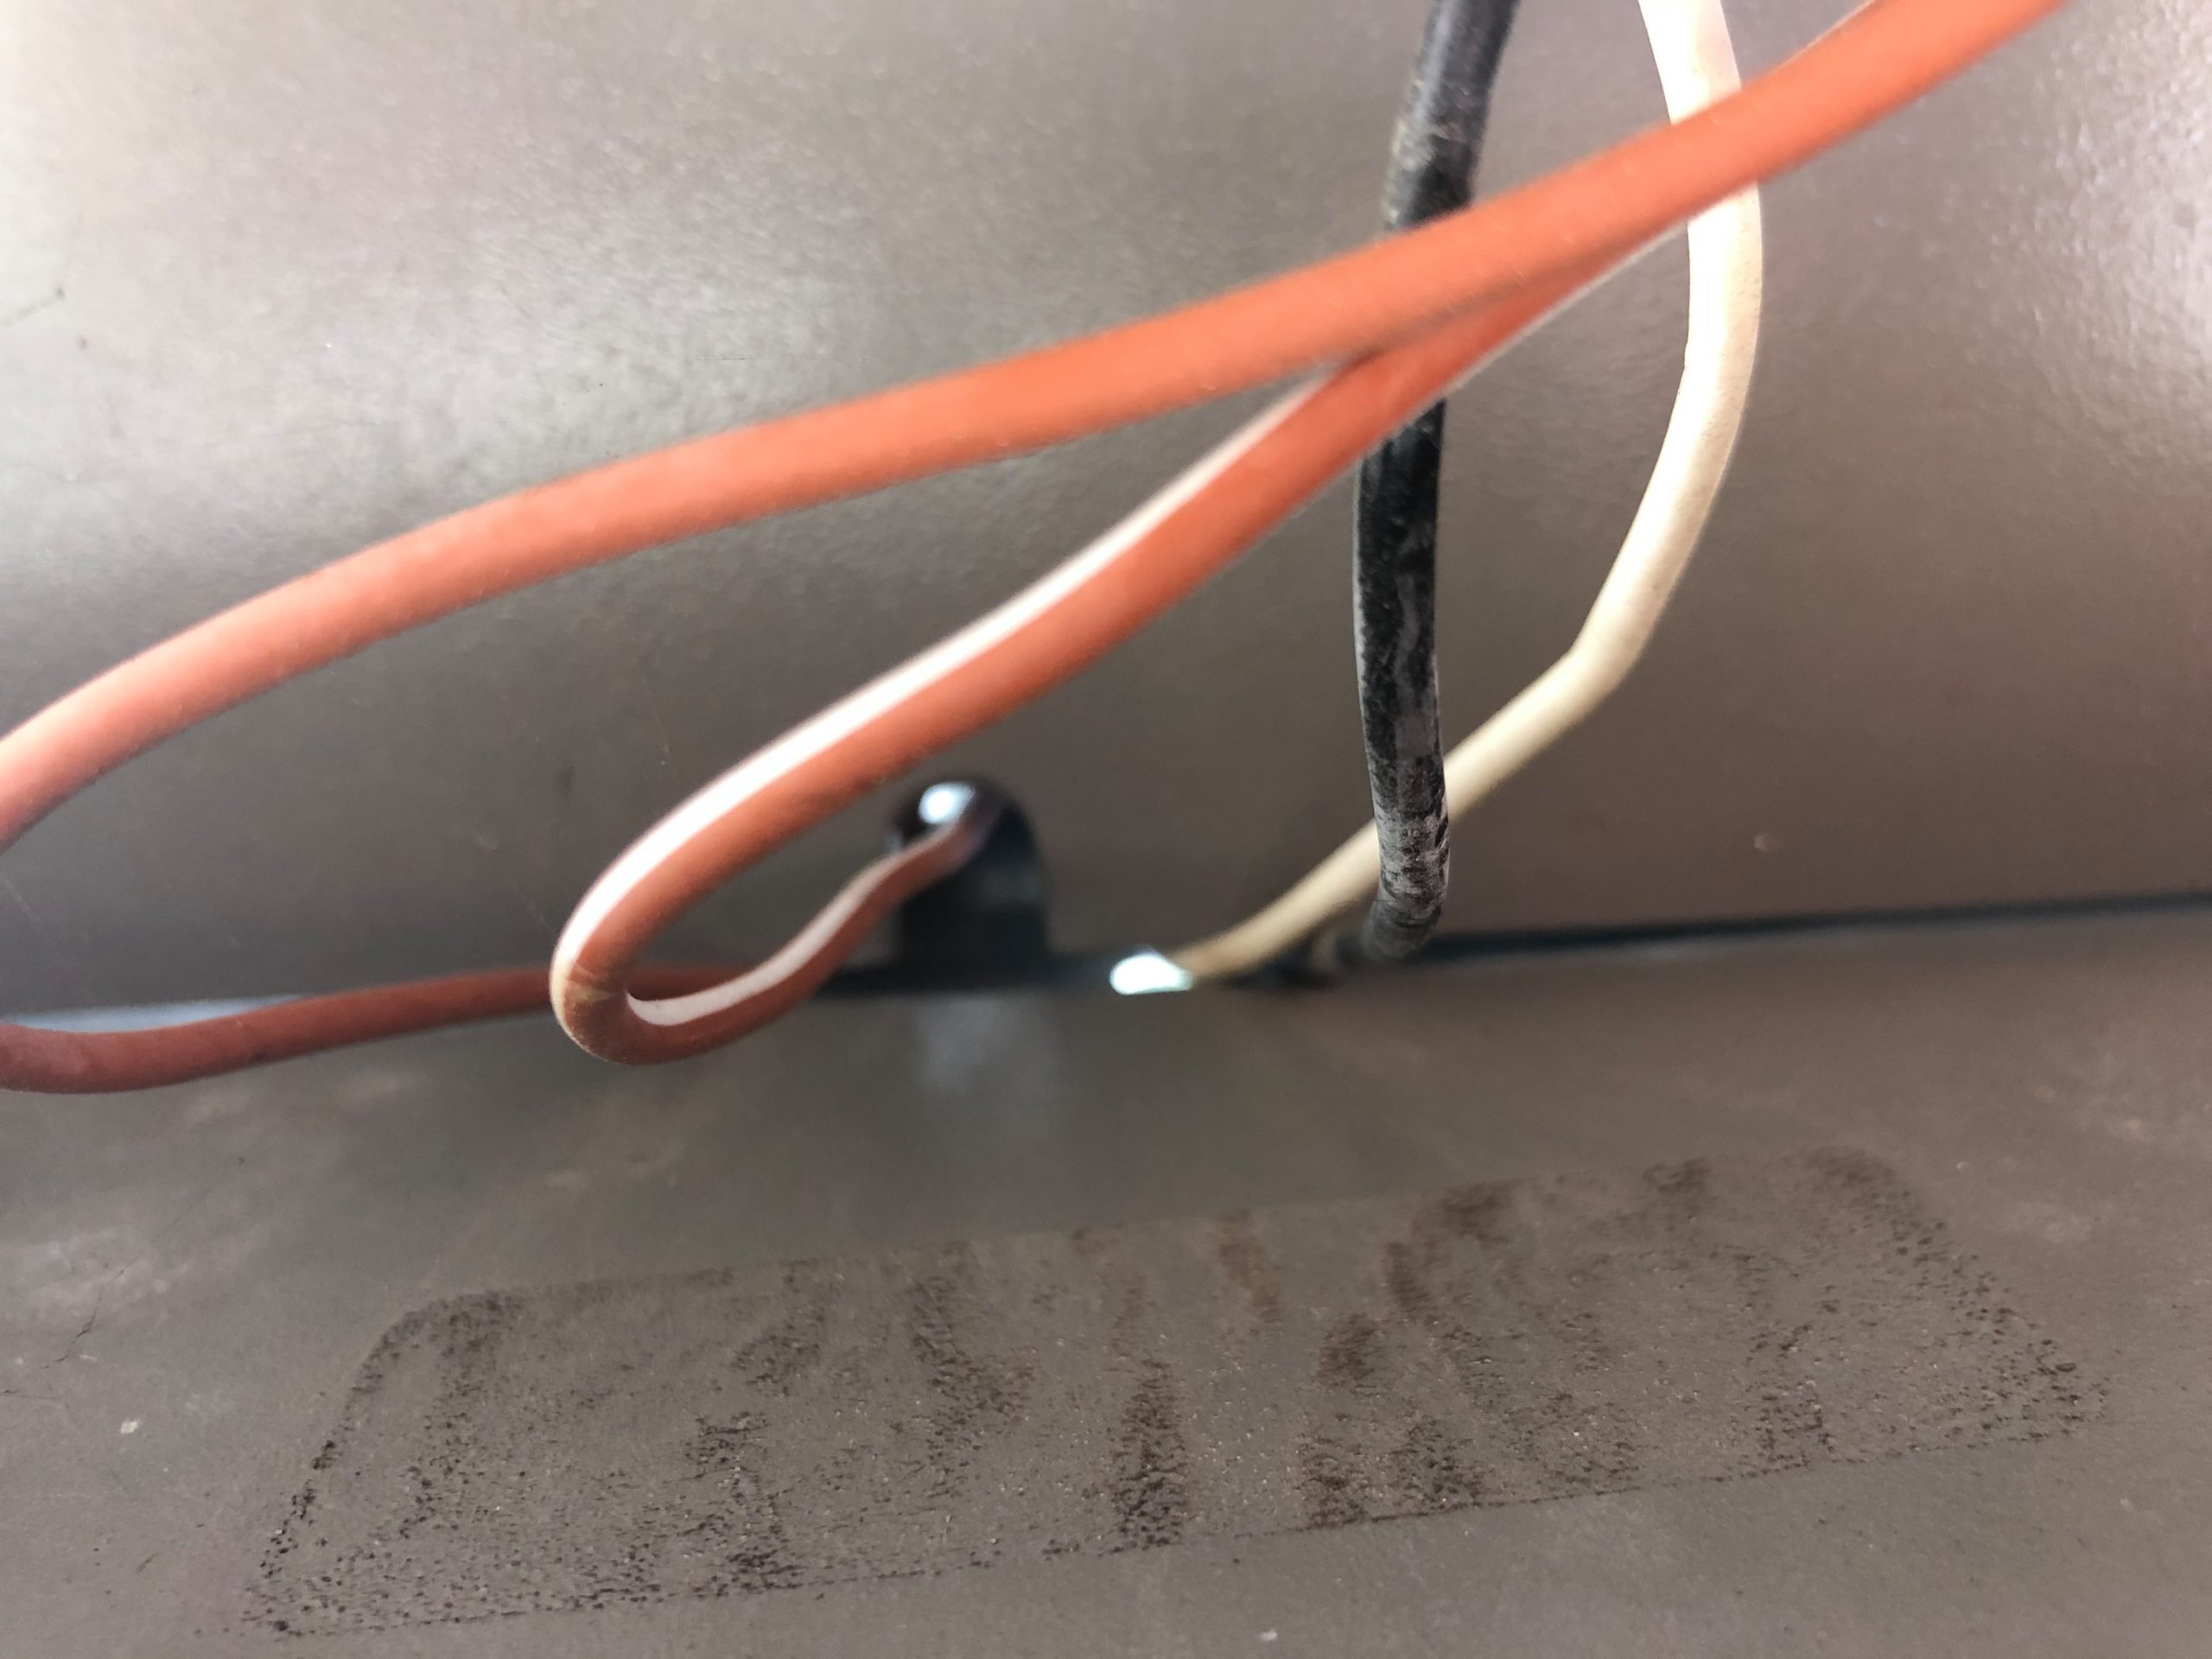 Wrong Way to place wires in an appliance